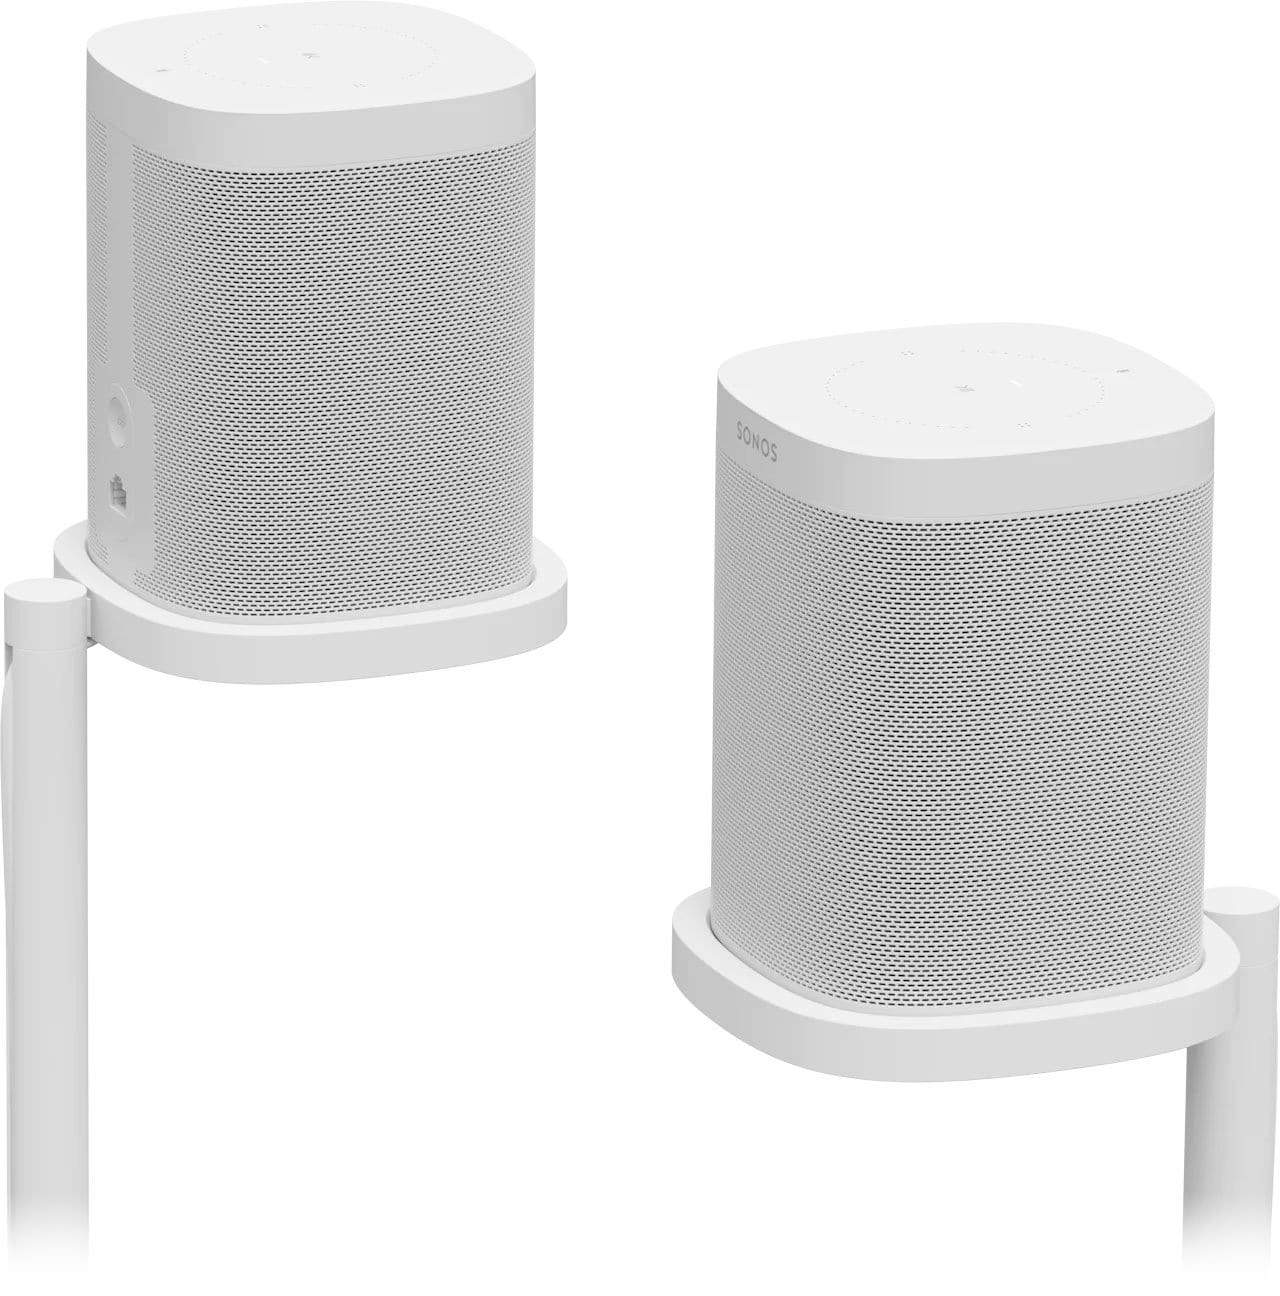 Sonos One & One SL Stands